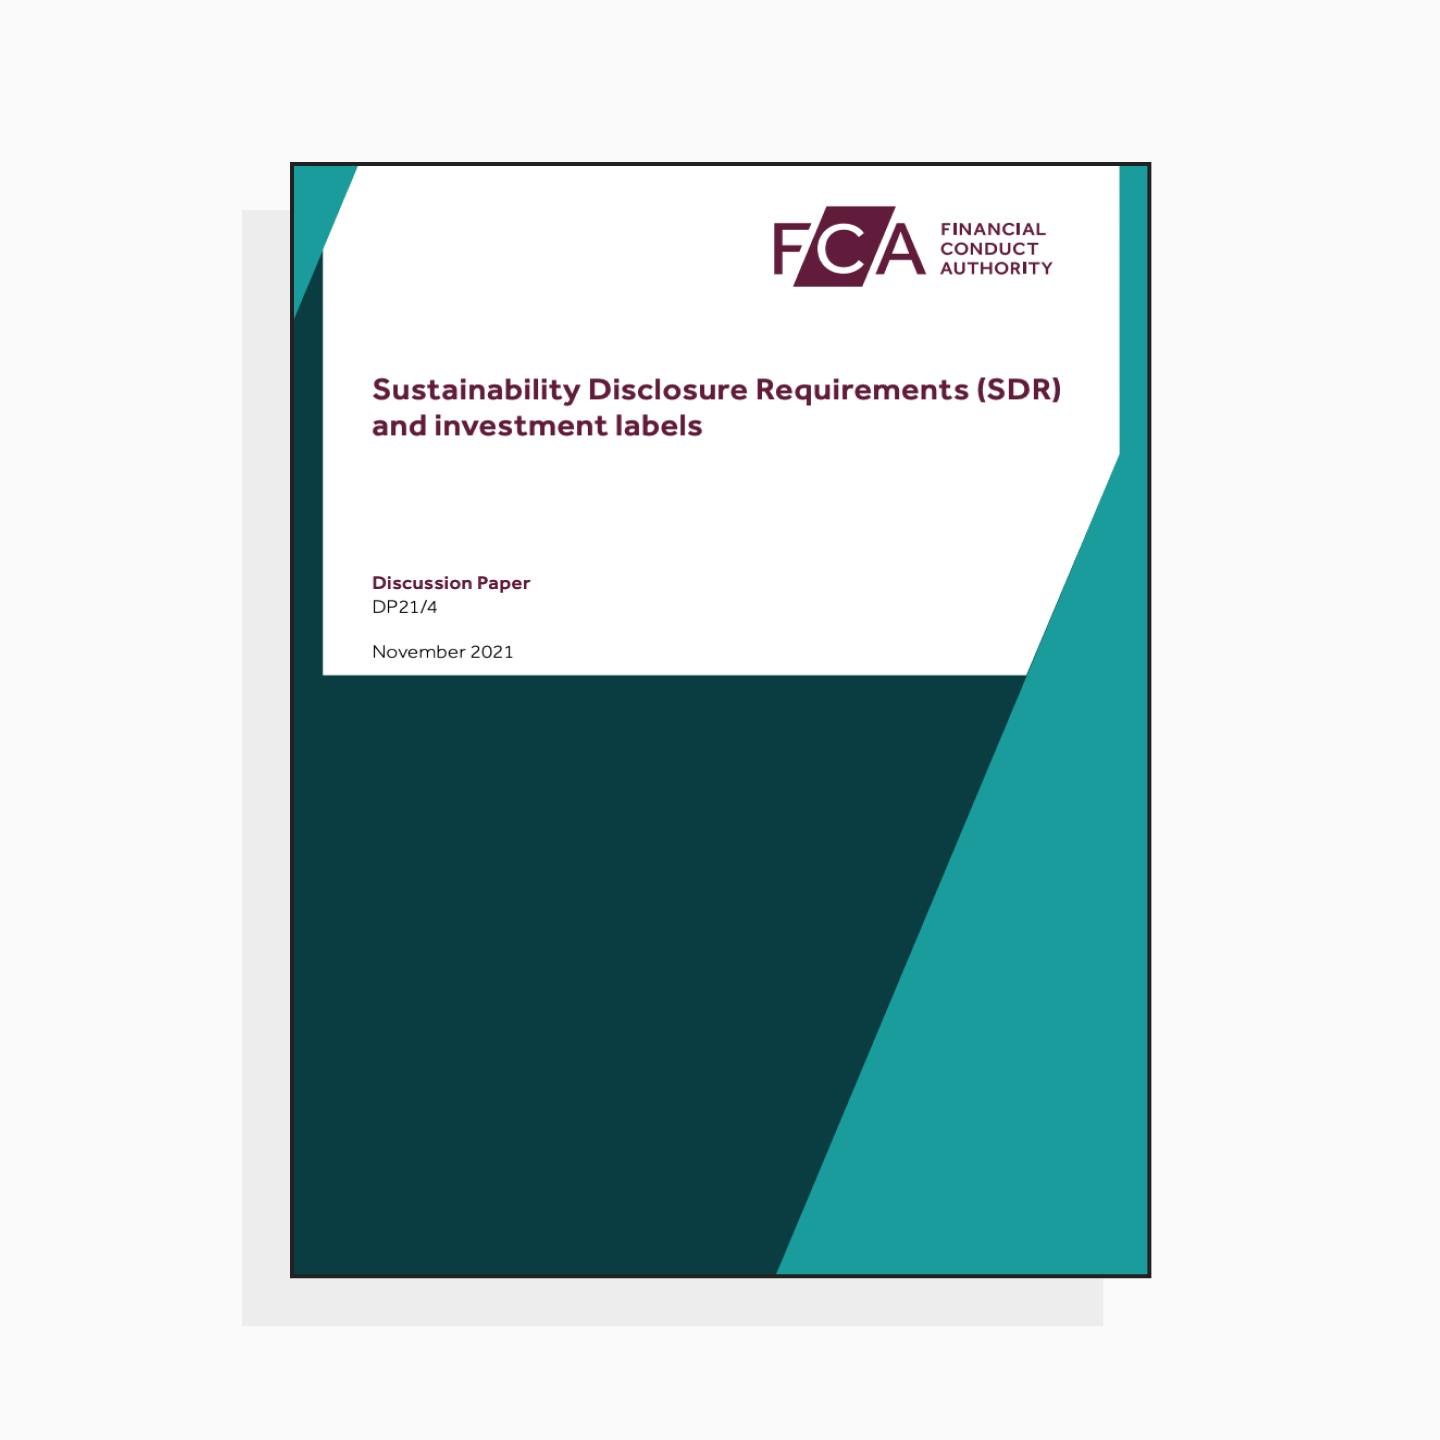 FCA discussion paper on Sustainability Disclosure Requirements